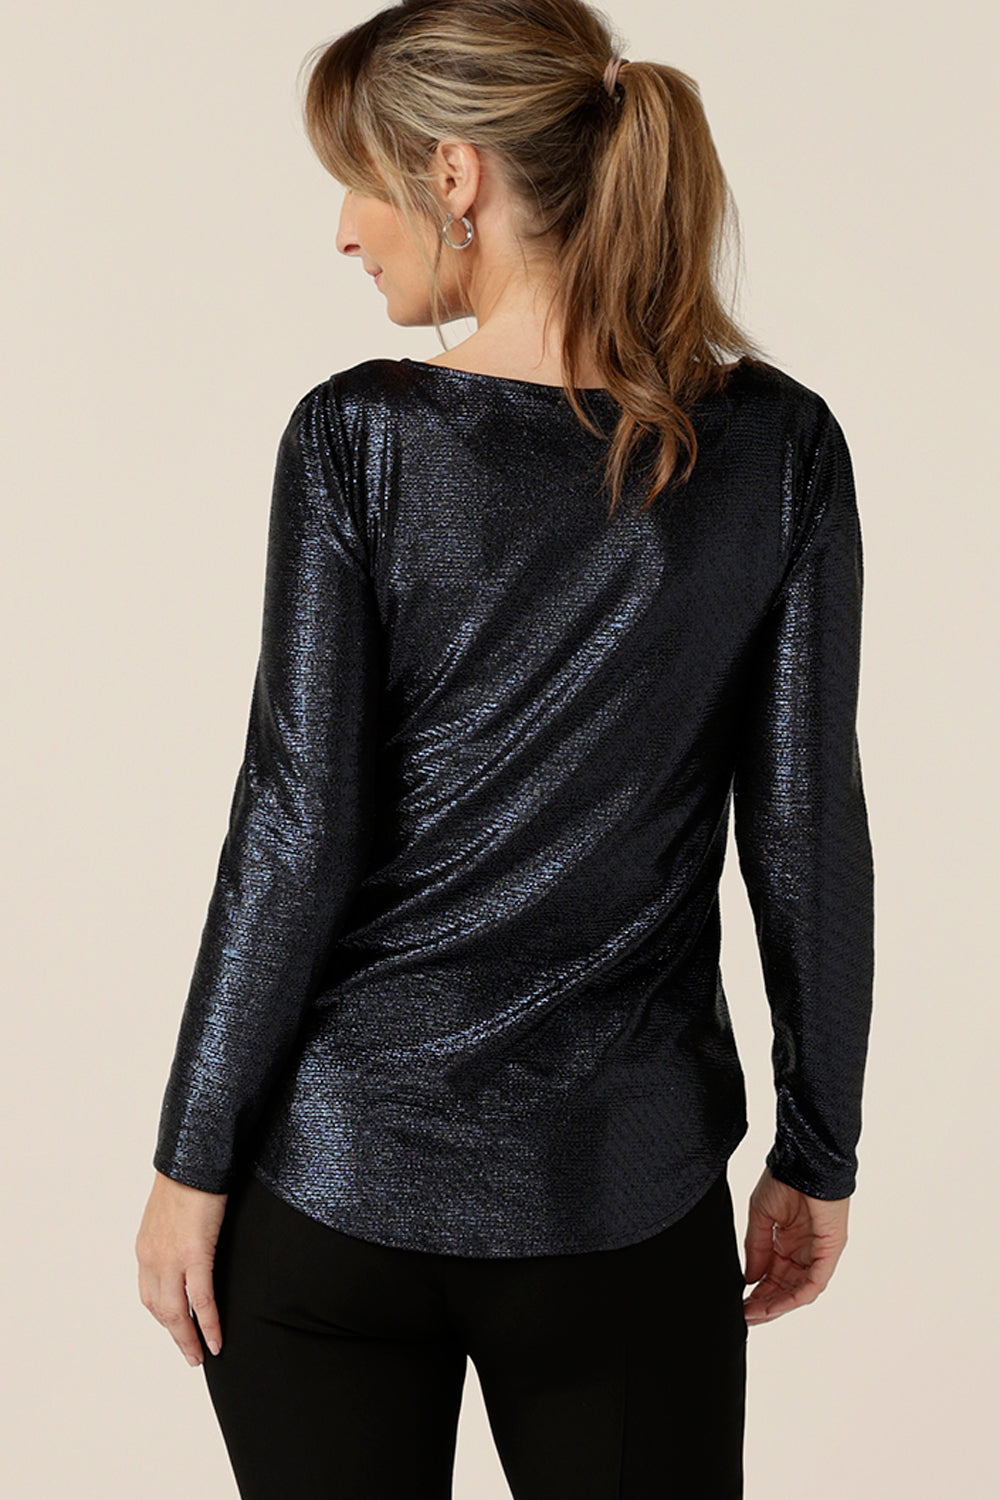 Back view of a size 10, 40-plus woman wearing a shimmering midnight blue, sparkly top with high scoop neck and long sleeves. Simple and easy-to-wear, this comfortable evening top is made in Australia in sizes 8 to 24.